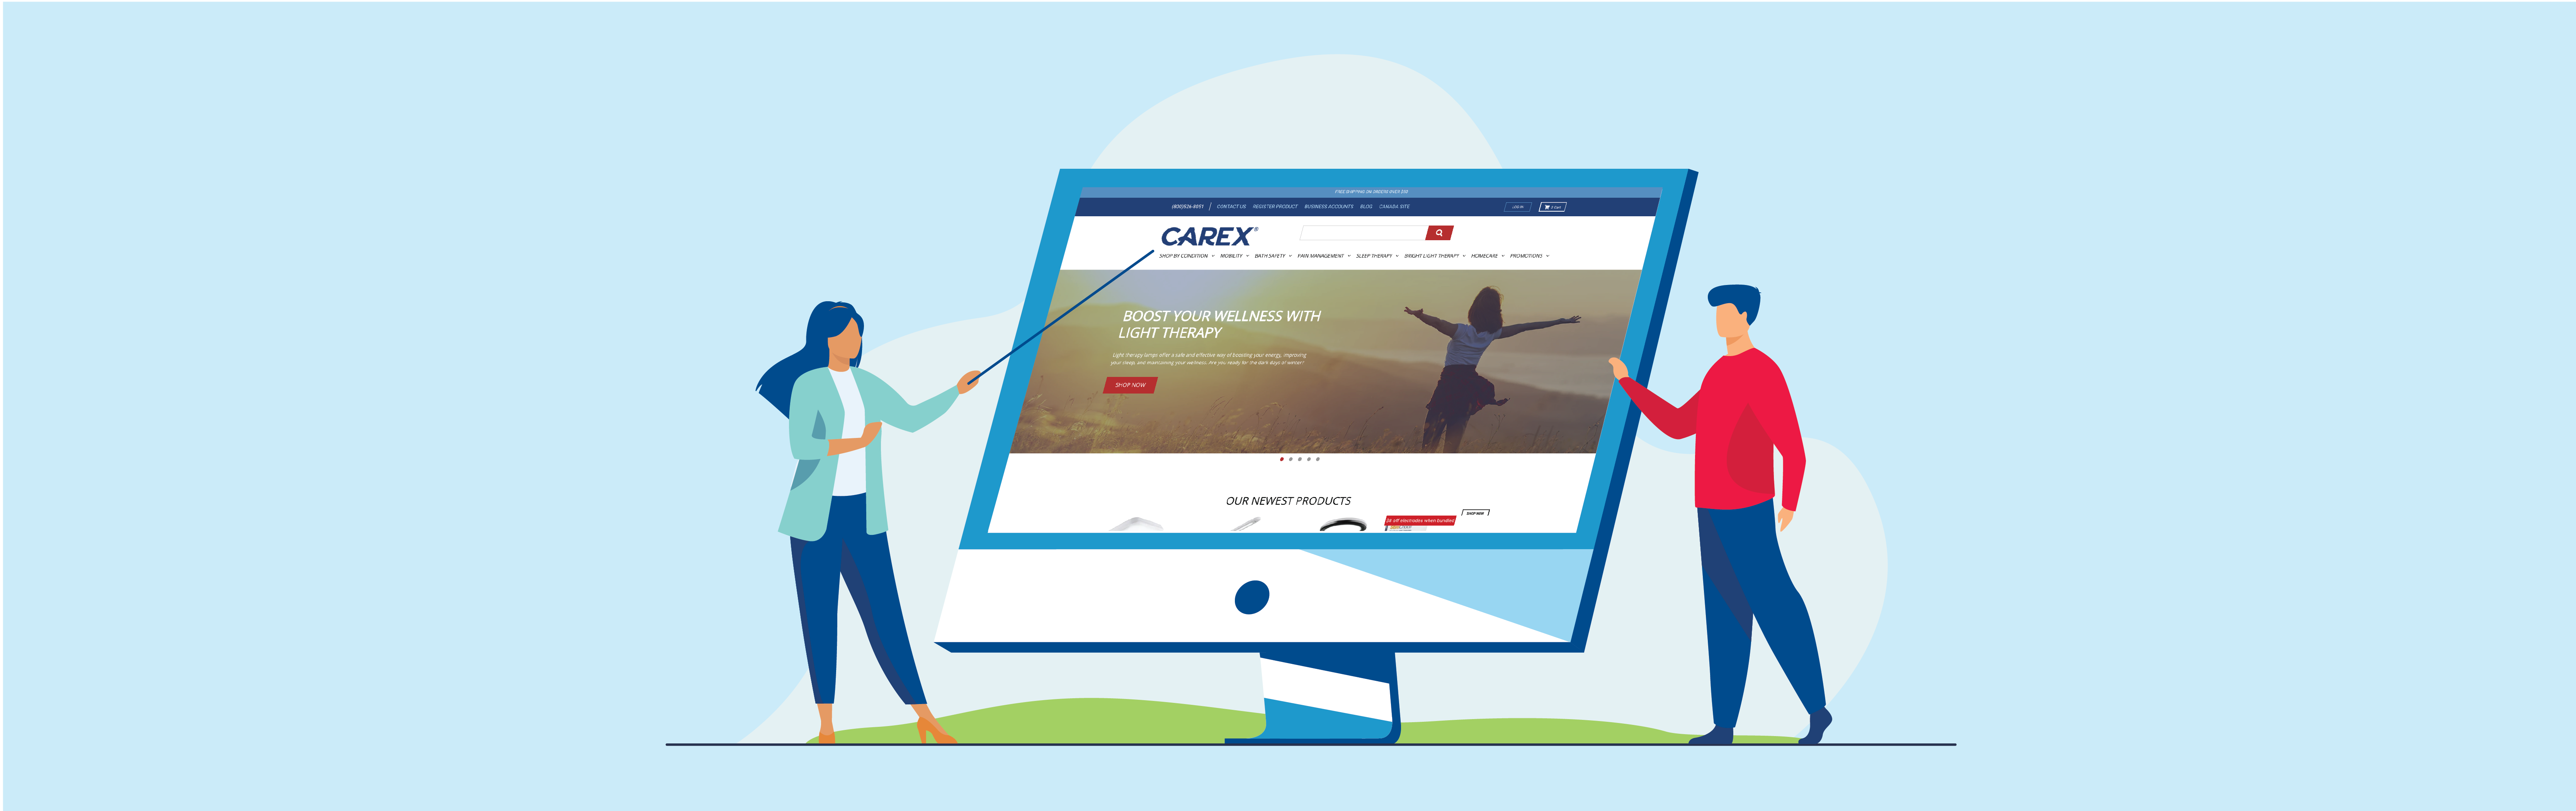 A graphic of two people next to the Carex website on a computer